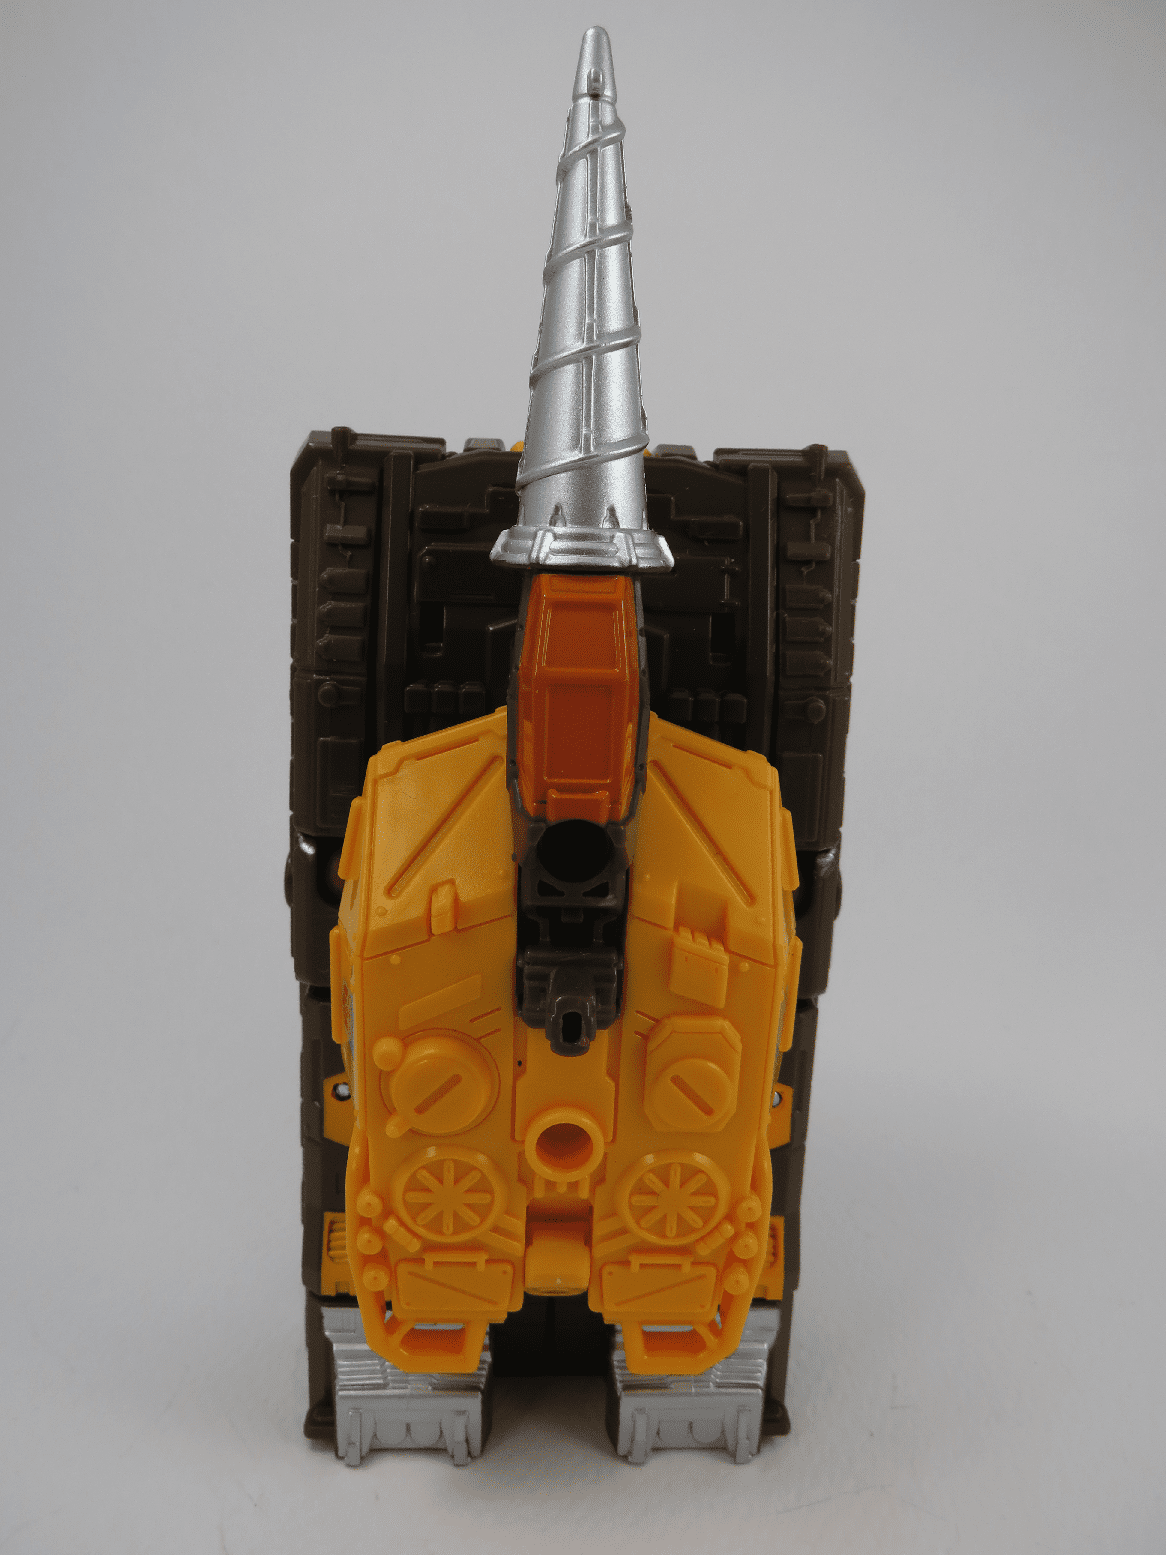 Alternate mode. (Nosecone from the Computron gift set)